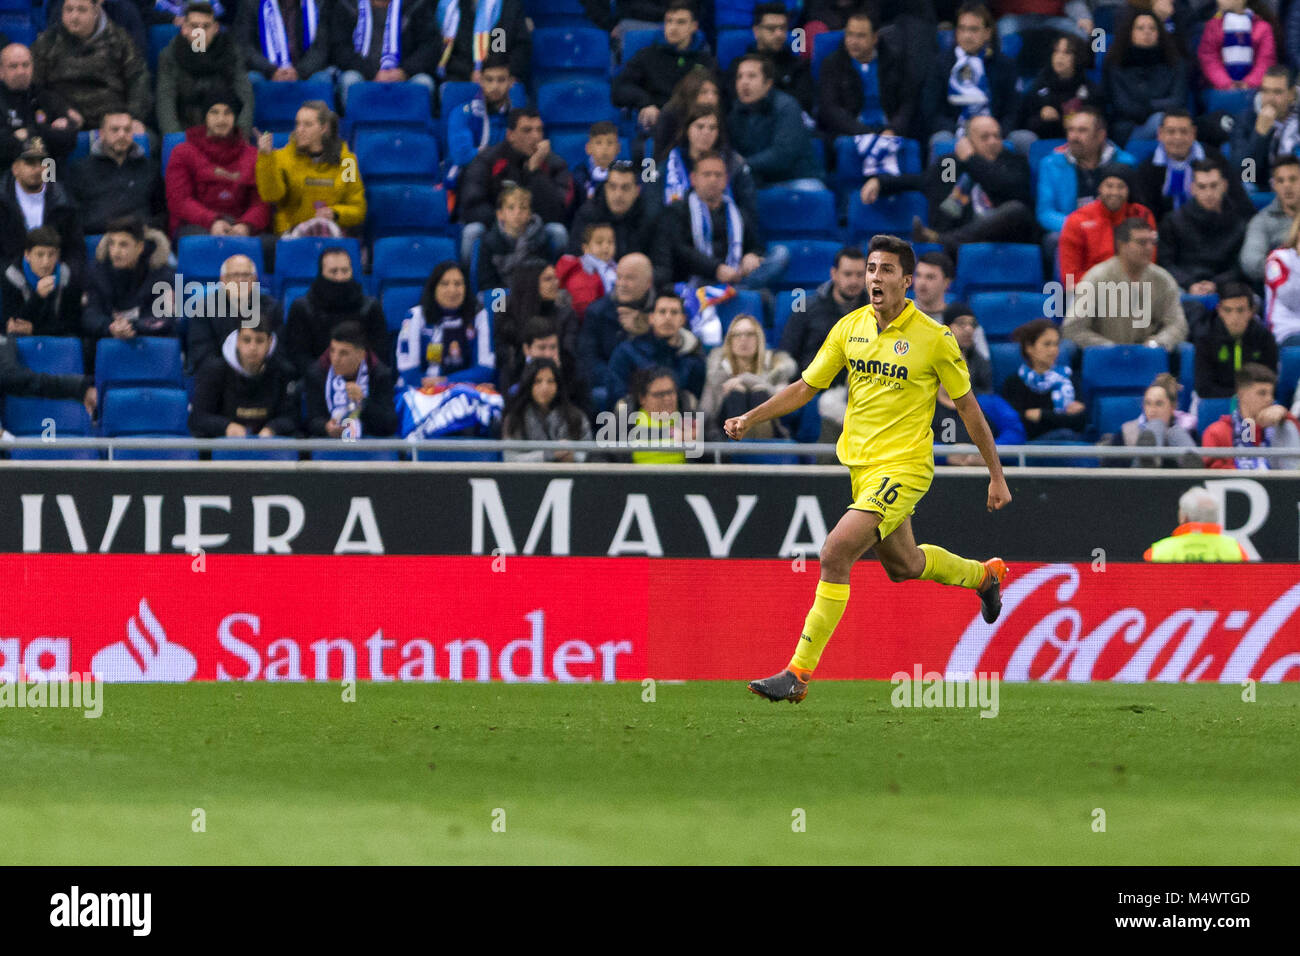 Barcelona, Spain. 18th Feb, 2018. Villarreal midfielder Rodrigo (16) celebrates scoring the goal during the match between RCD Espanyol and Villarreal, for the round 24 of the Liga Santander, played at RCDE Stadium on 18th February 2018 in Barcelona, Spain. Credit: Gtres Información más Comuniación on line, S.L./Alamy Live News Stock Photo